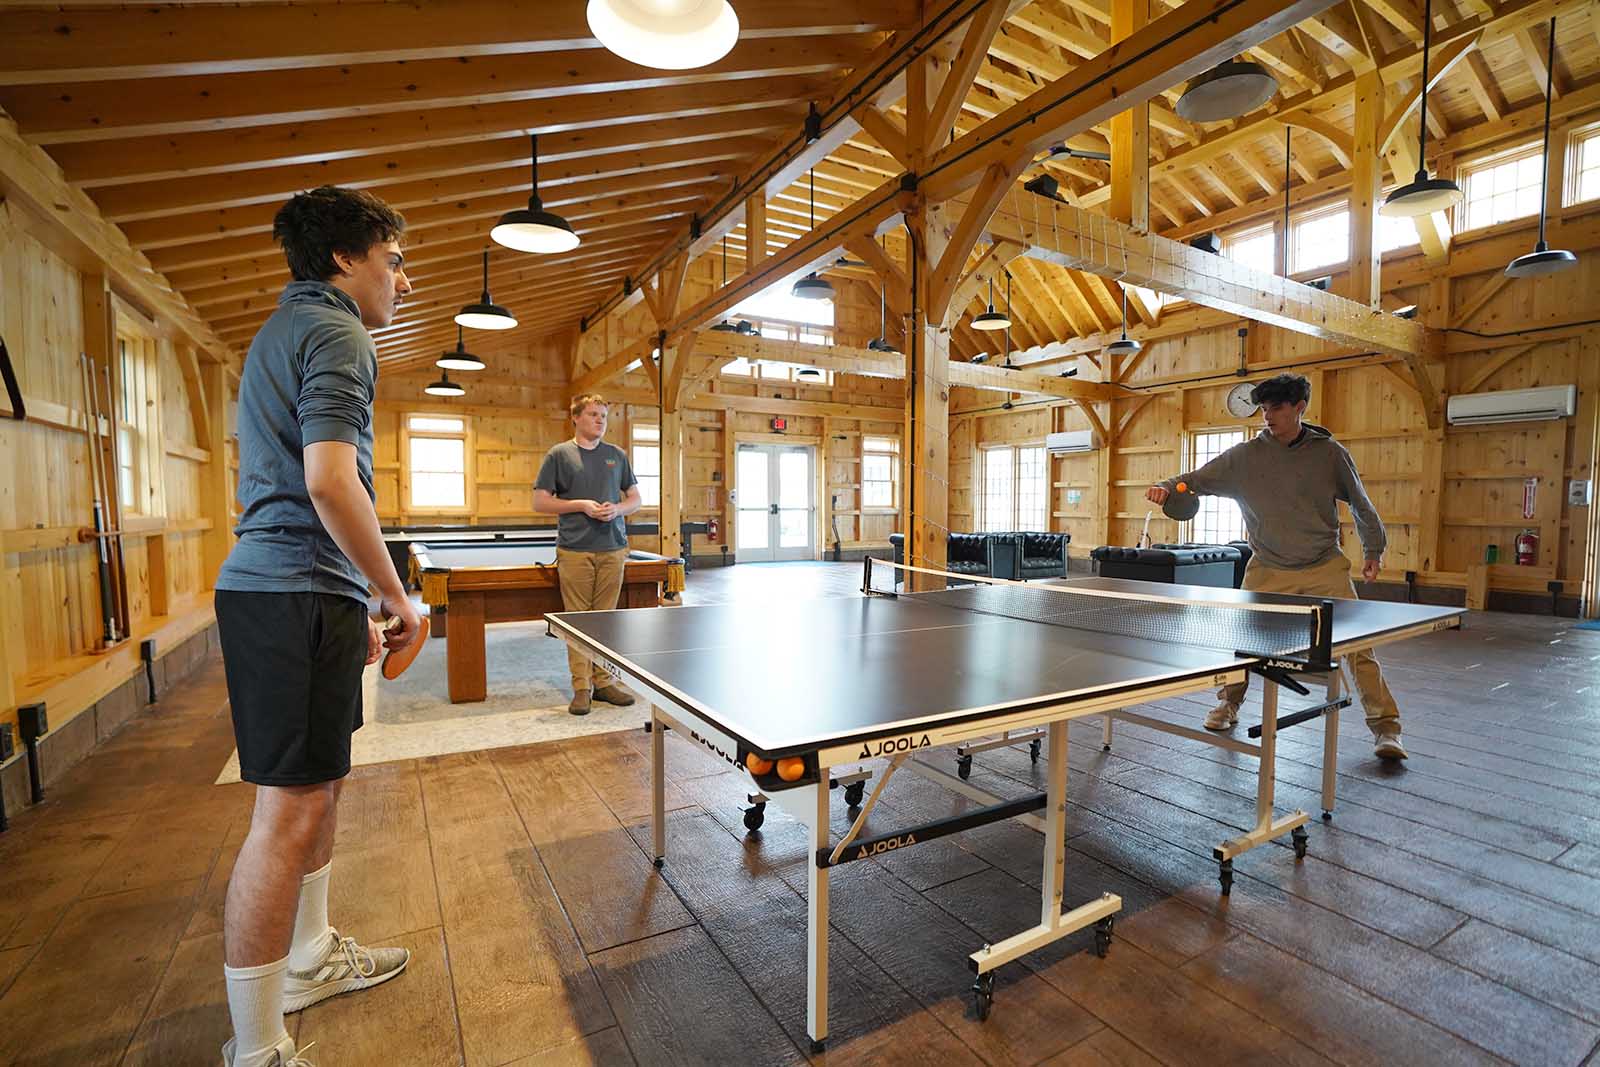 Two men playing ping pong in a log cabin.